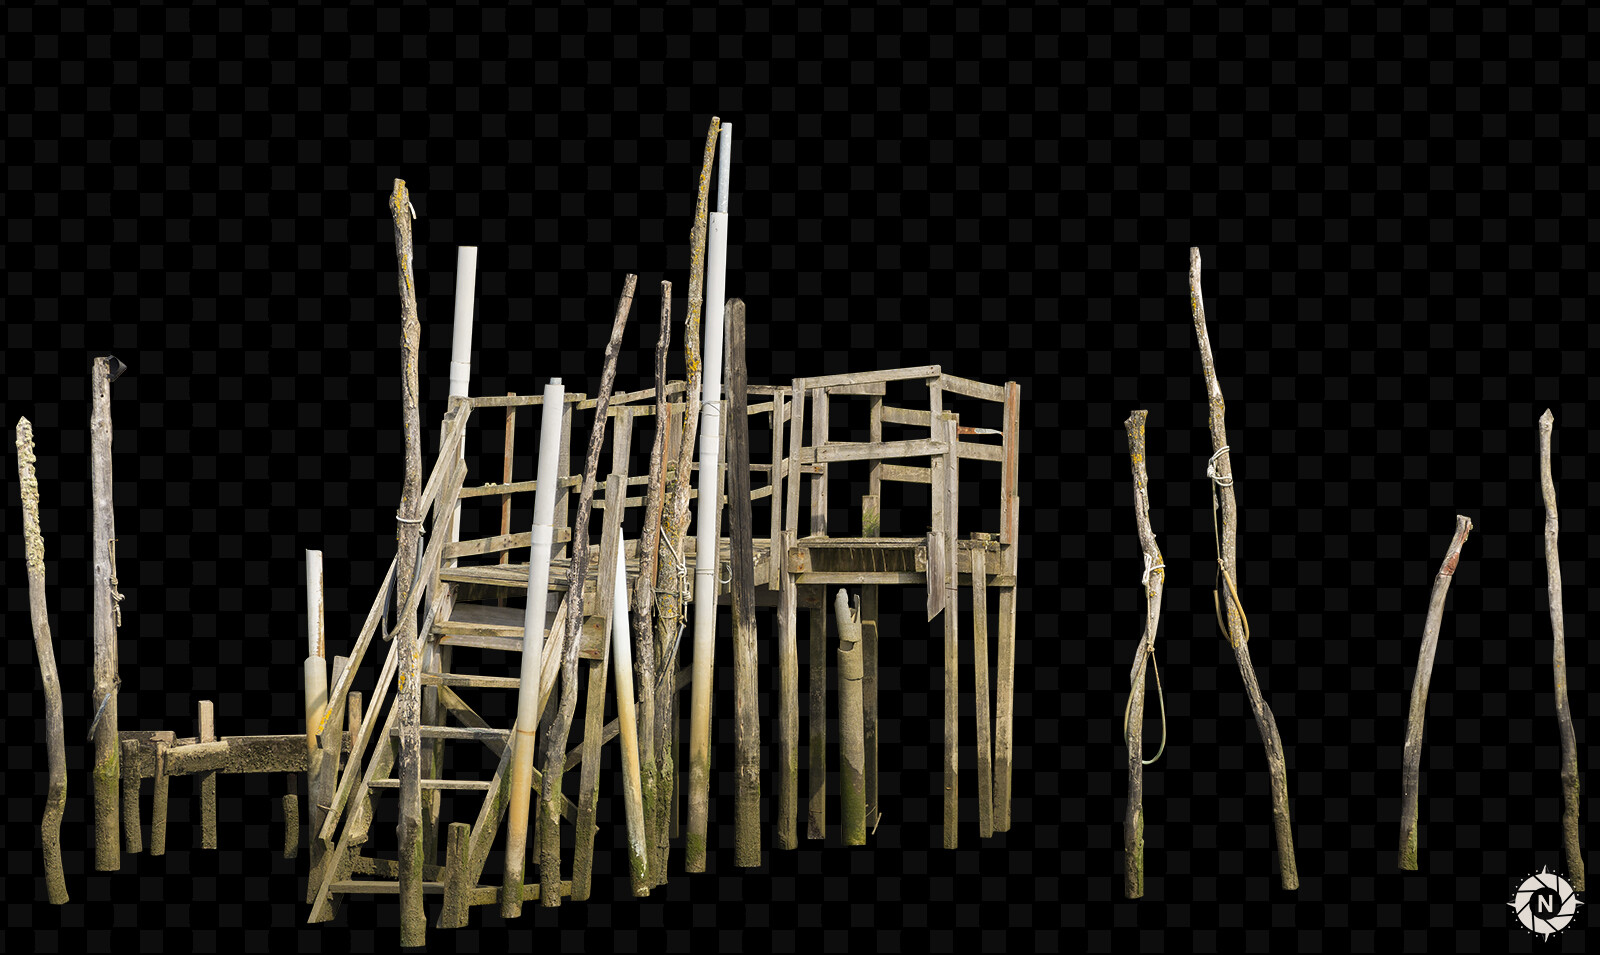 From the PNG Photo Pack: Wooden Structures

https://www.artstation.com/a/165845